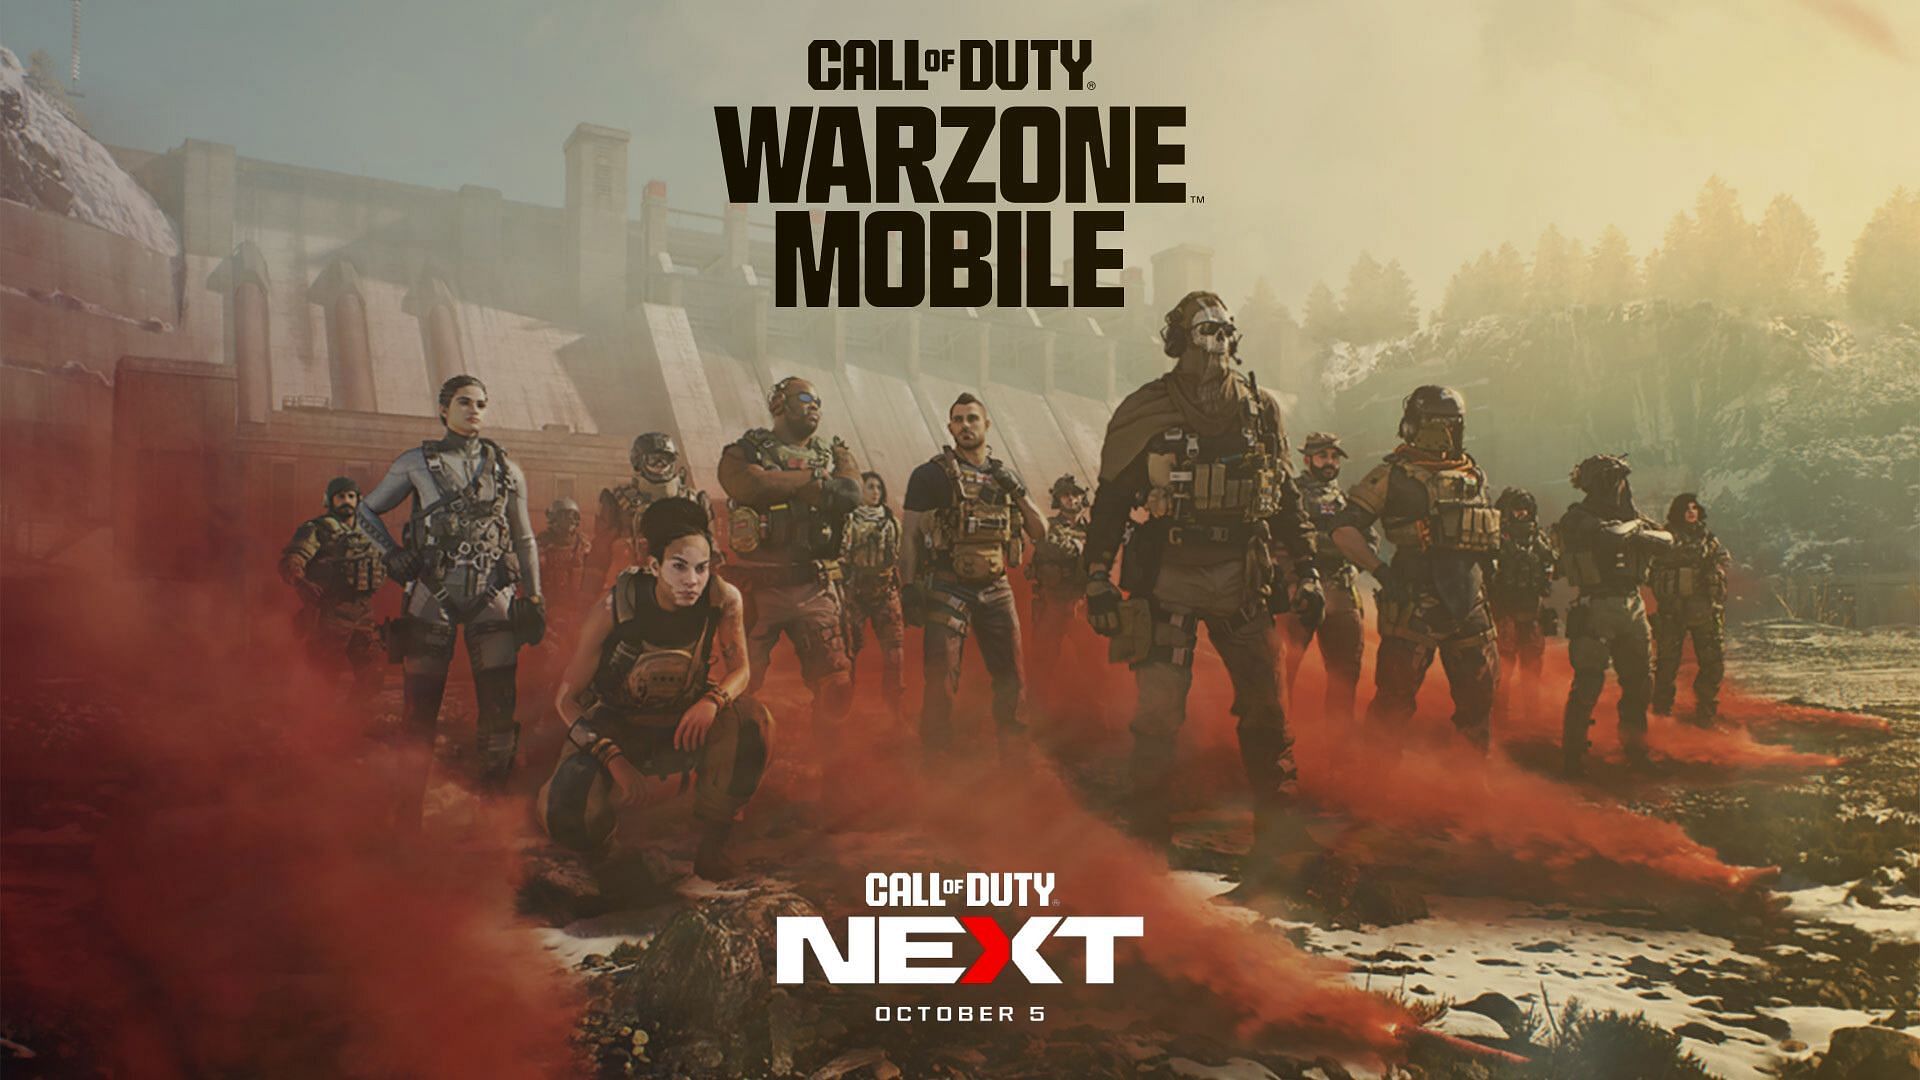 Call of Duty: Warzone Mobile announced, more details at 'COD: Next' event -  Stealthy Gaming